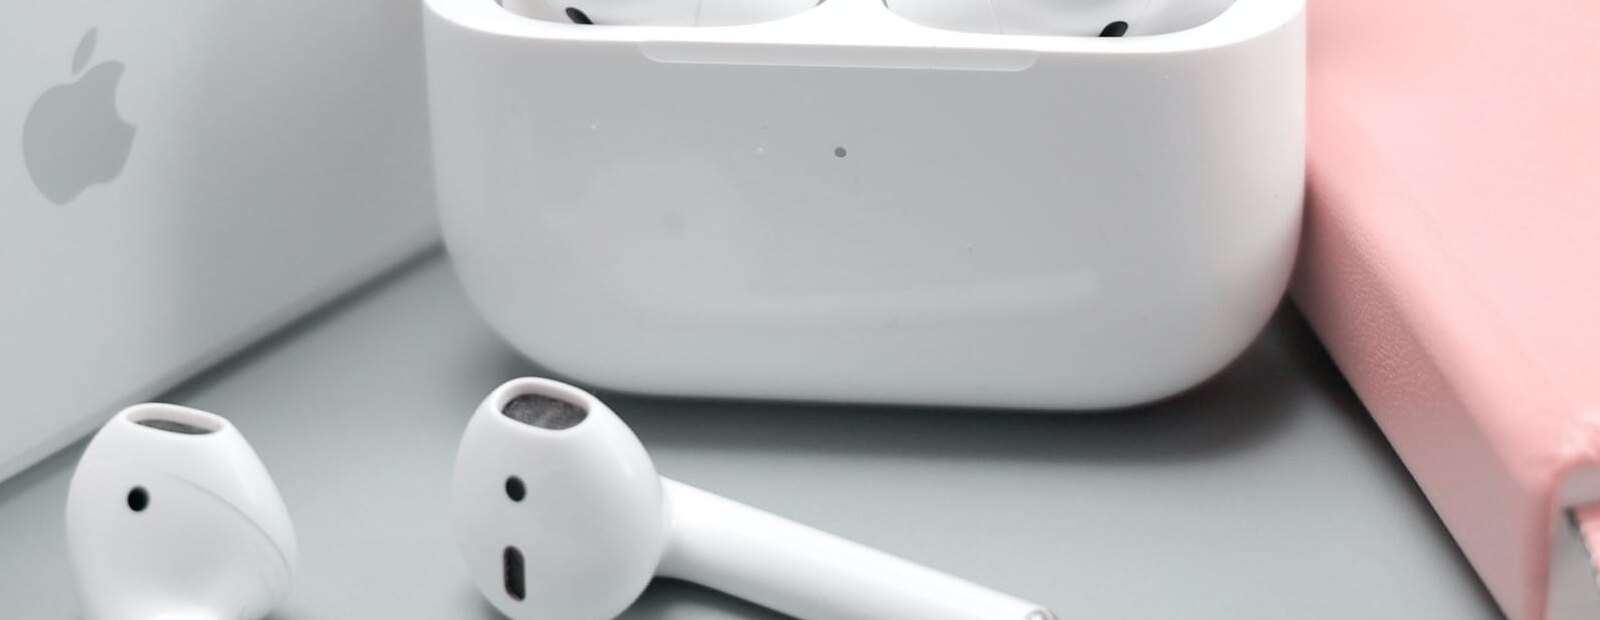 AirPods Pro 2 и AirPods 3